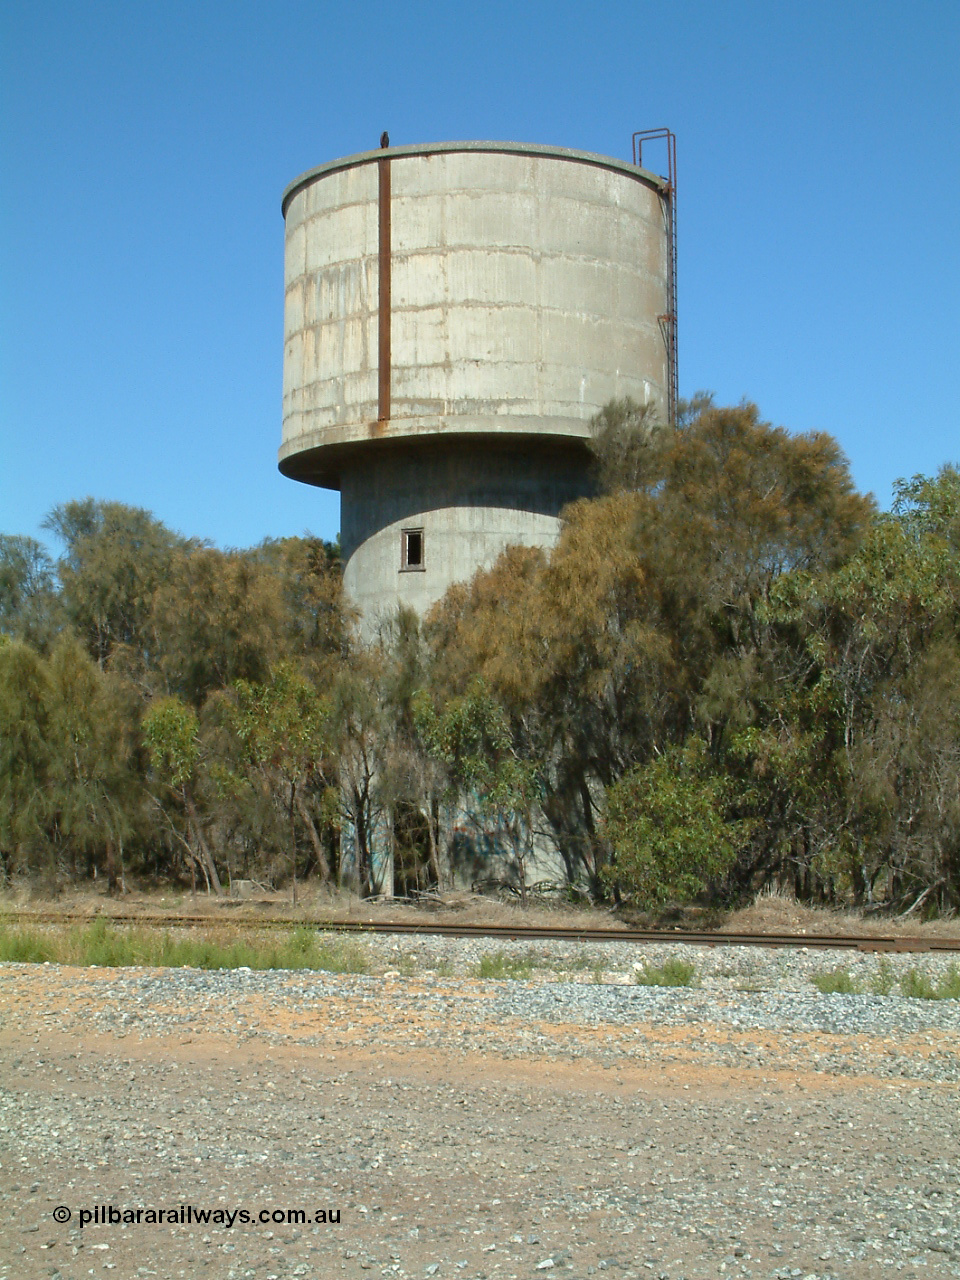 030406 110118
Coomunga, 227,000 litre concrete overhead water storage tank survives from circa 1936. 6th April 2003.
